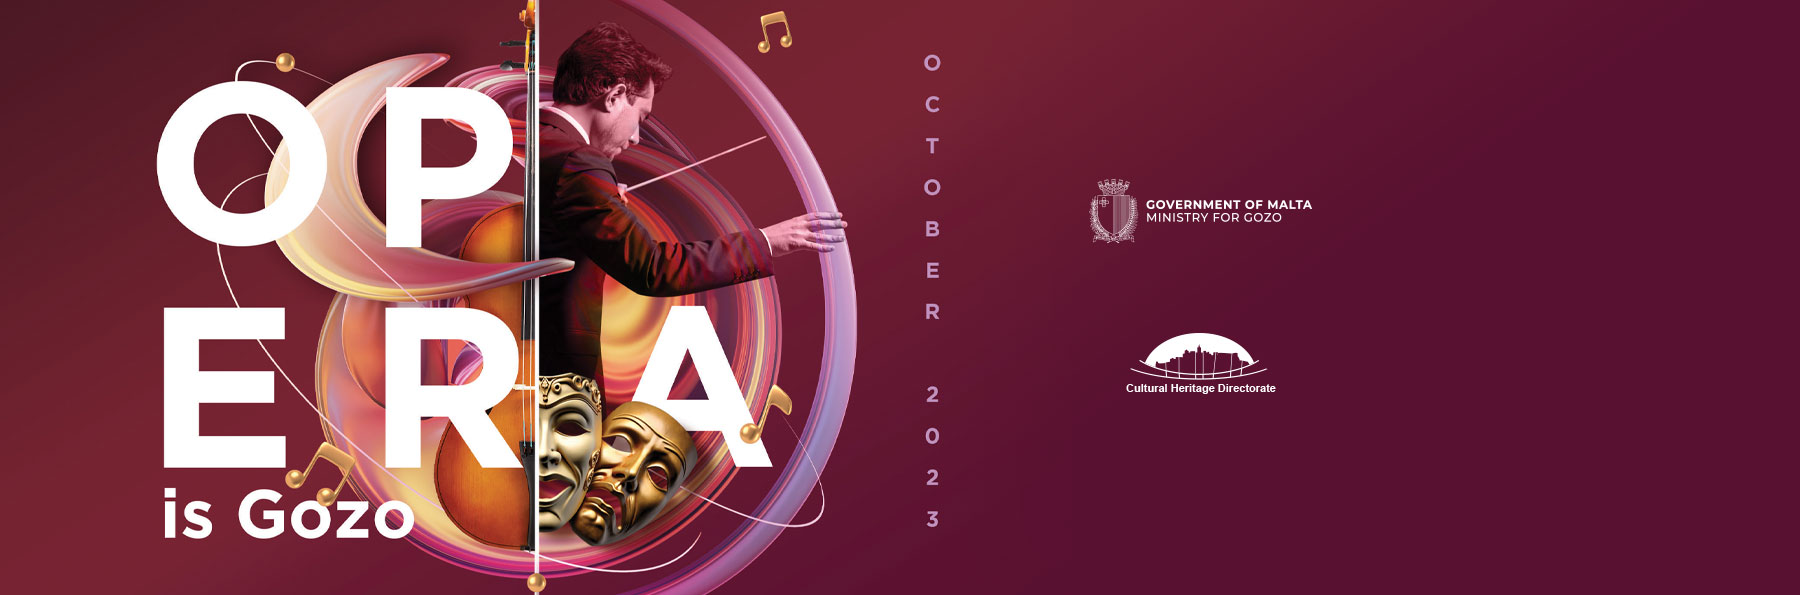 Opera is Gozo – a whole month of activities related to Opera in Gozo